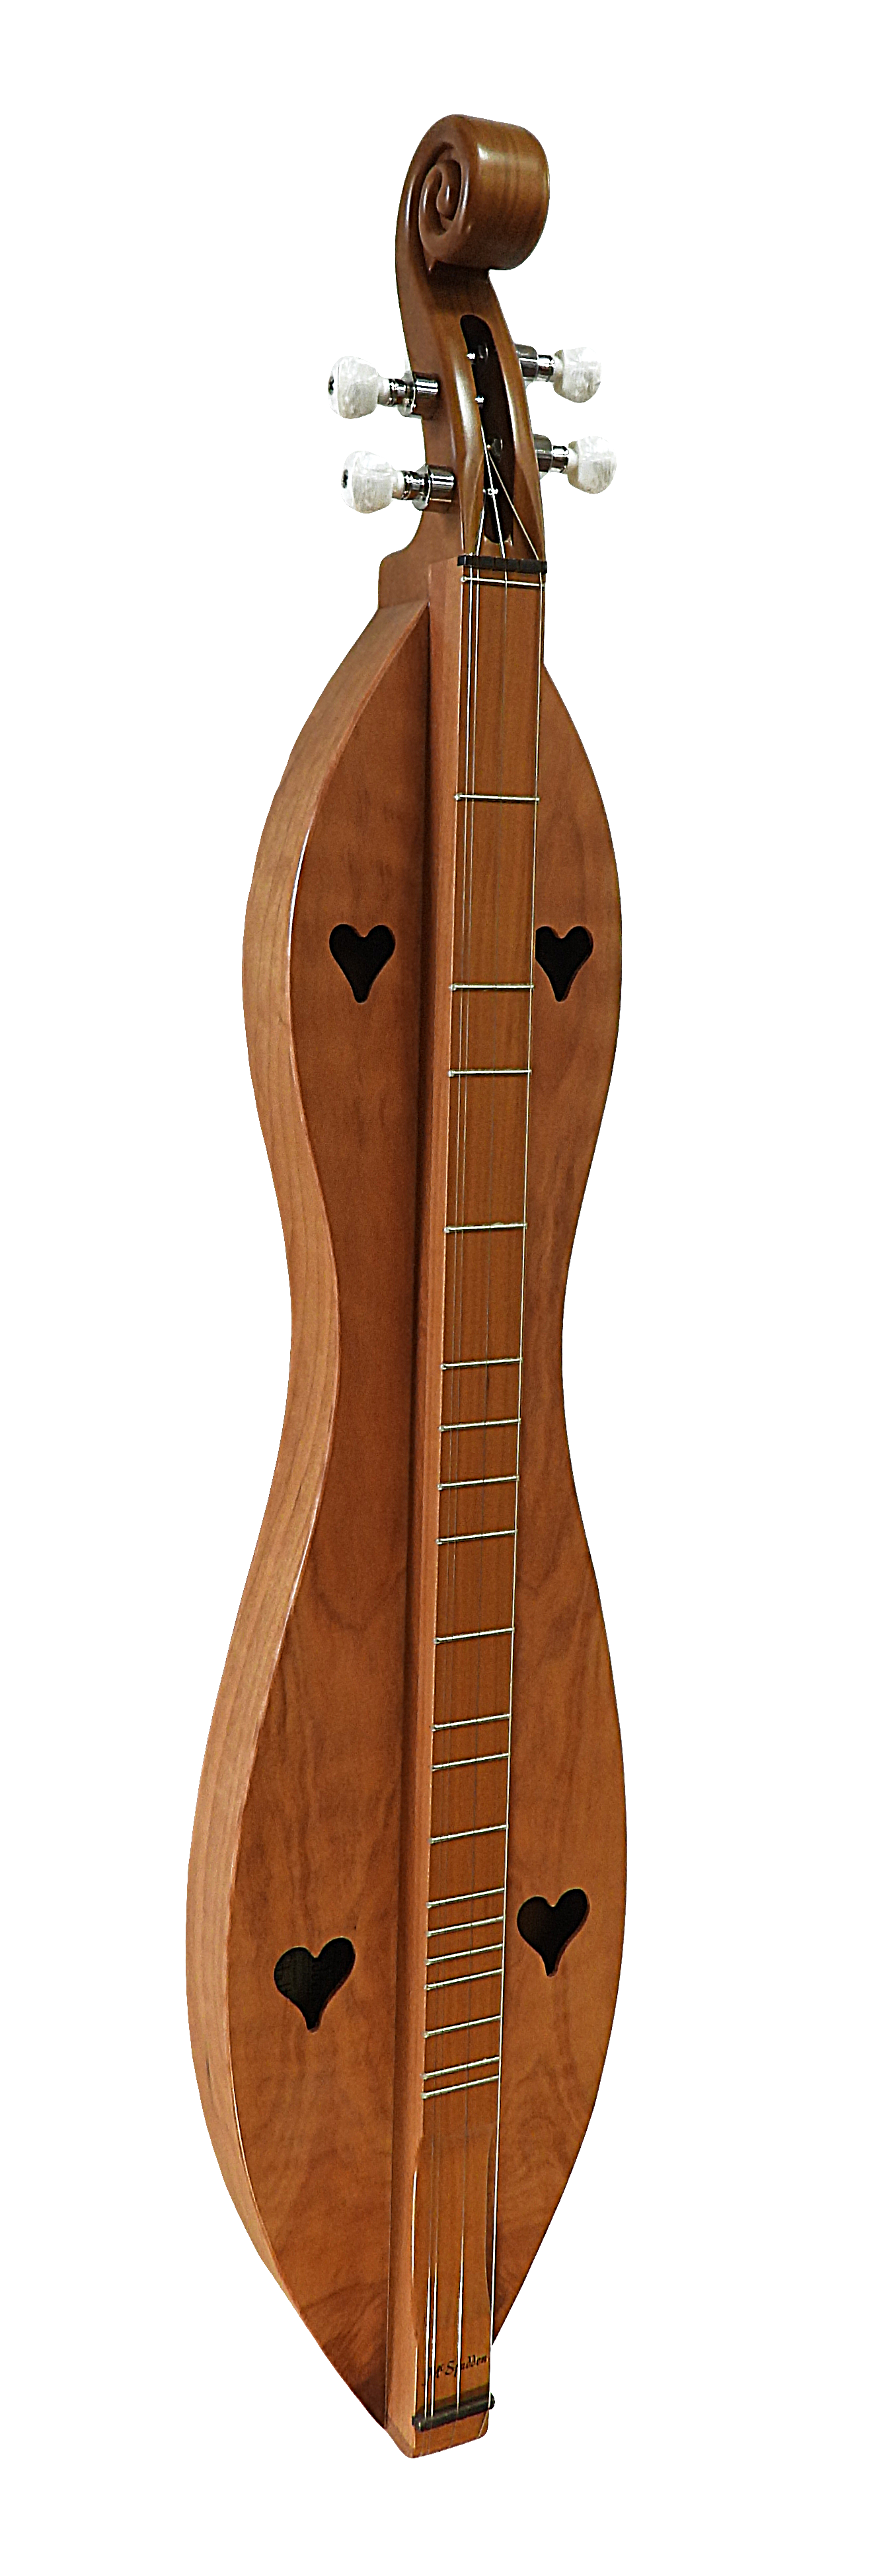 This 4SHCC is a handcrafted wooden musical instrument with a wooden body. It comes with a lifetime warranty.